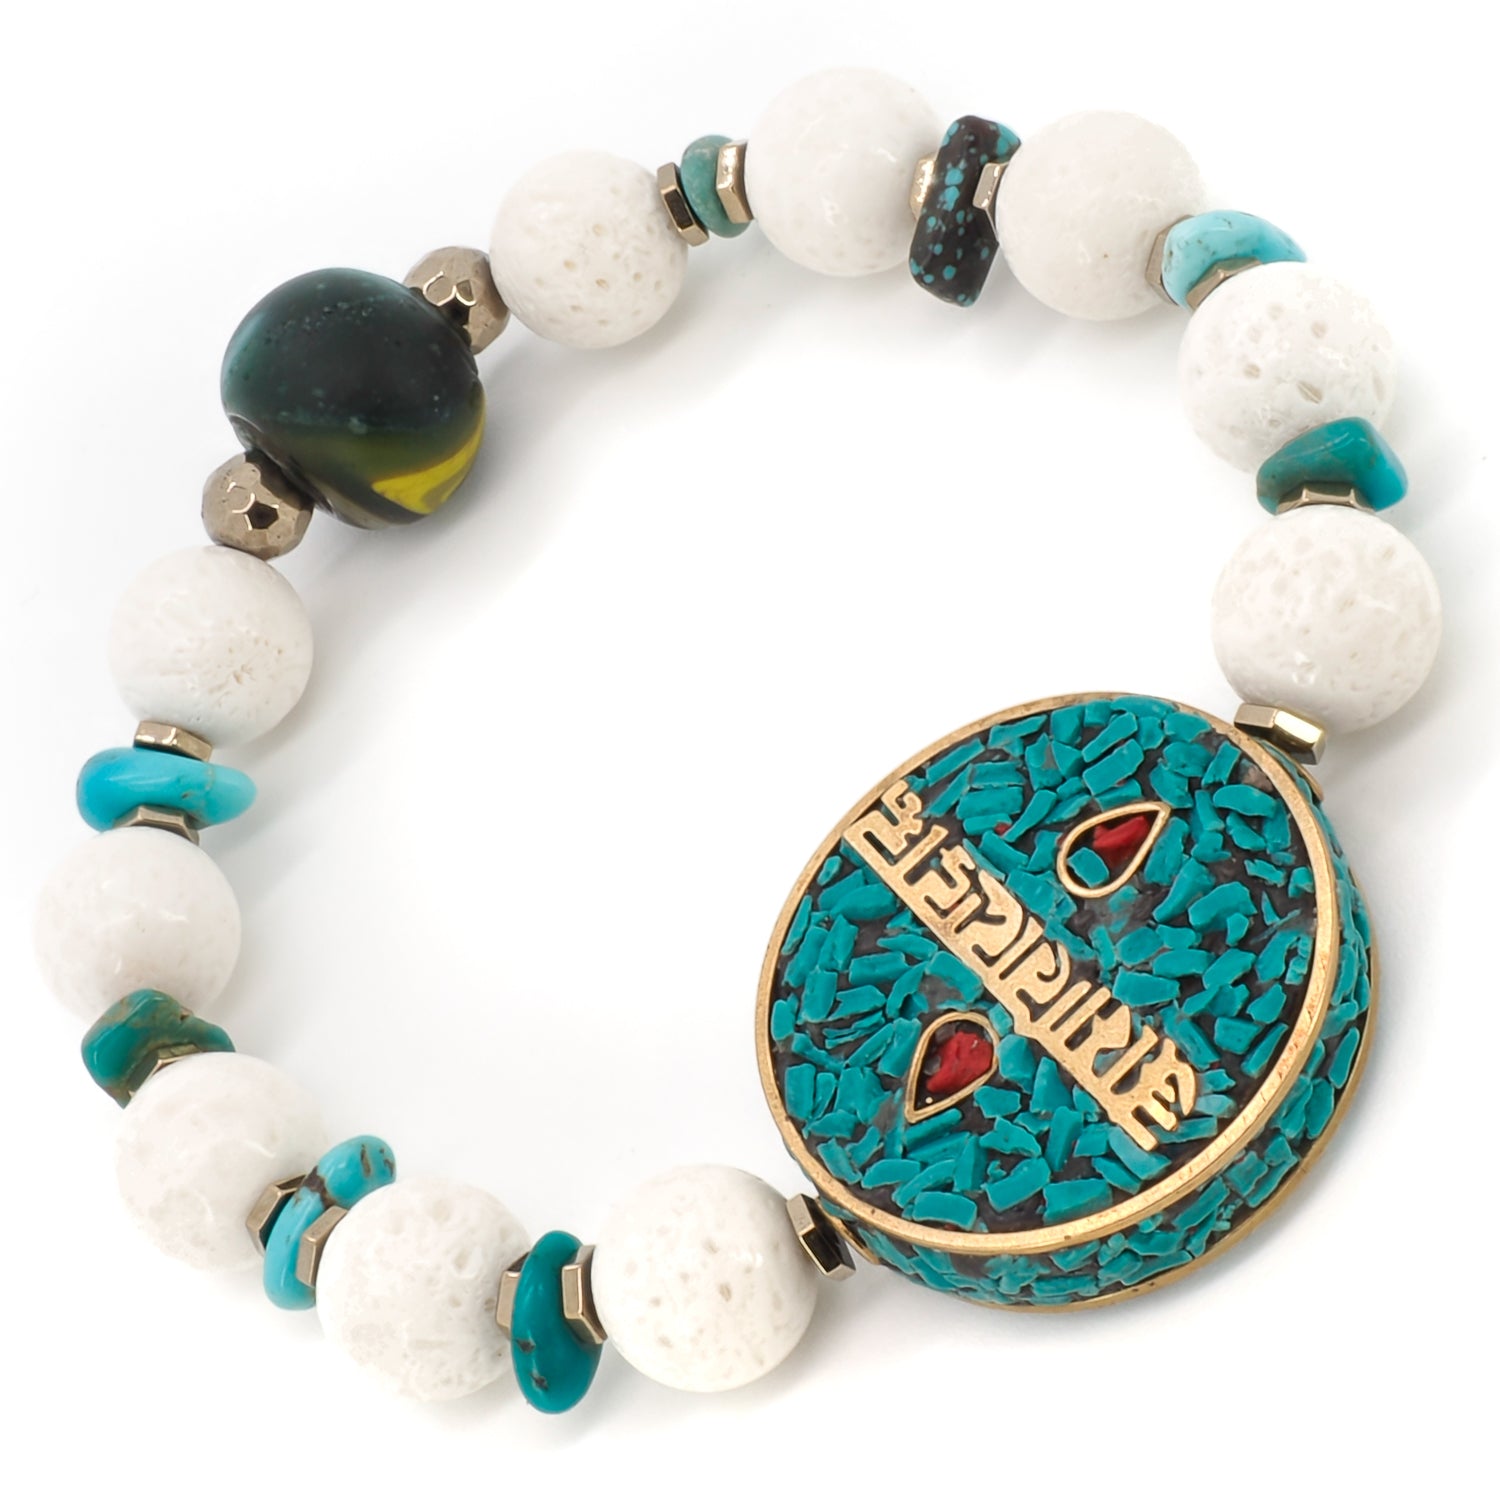 Feel the energy of the OM Mani Mantra Bracelet, handmade with care and attention to detail for a meaningful and unique accessory.